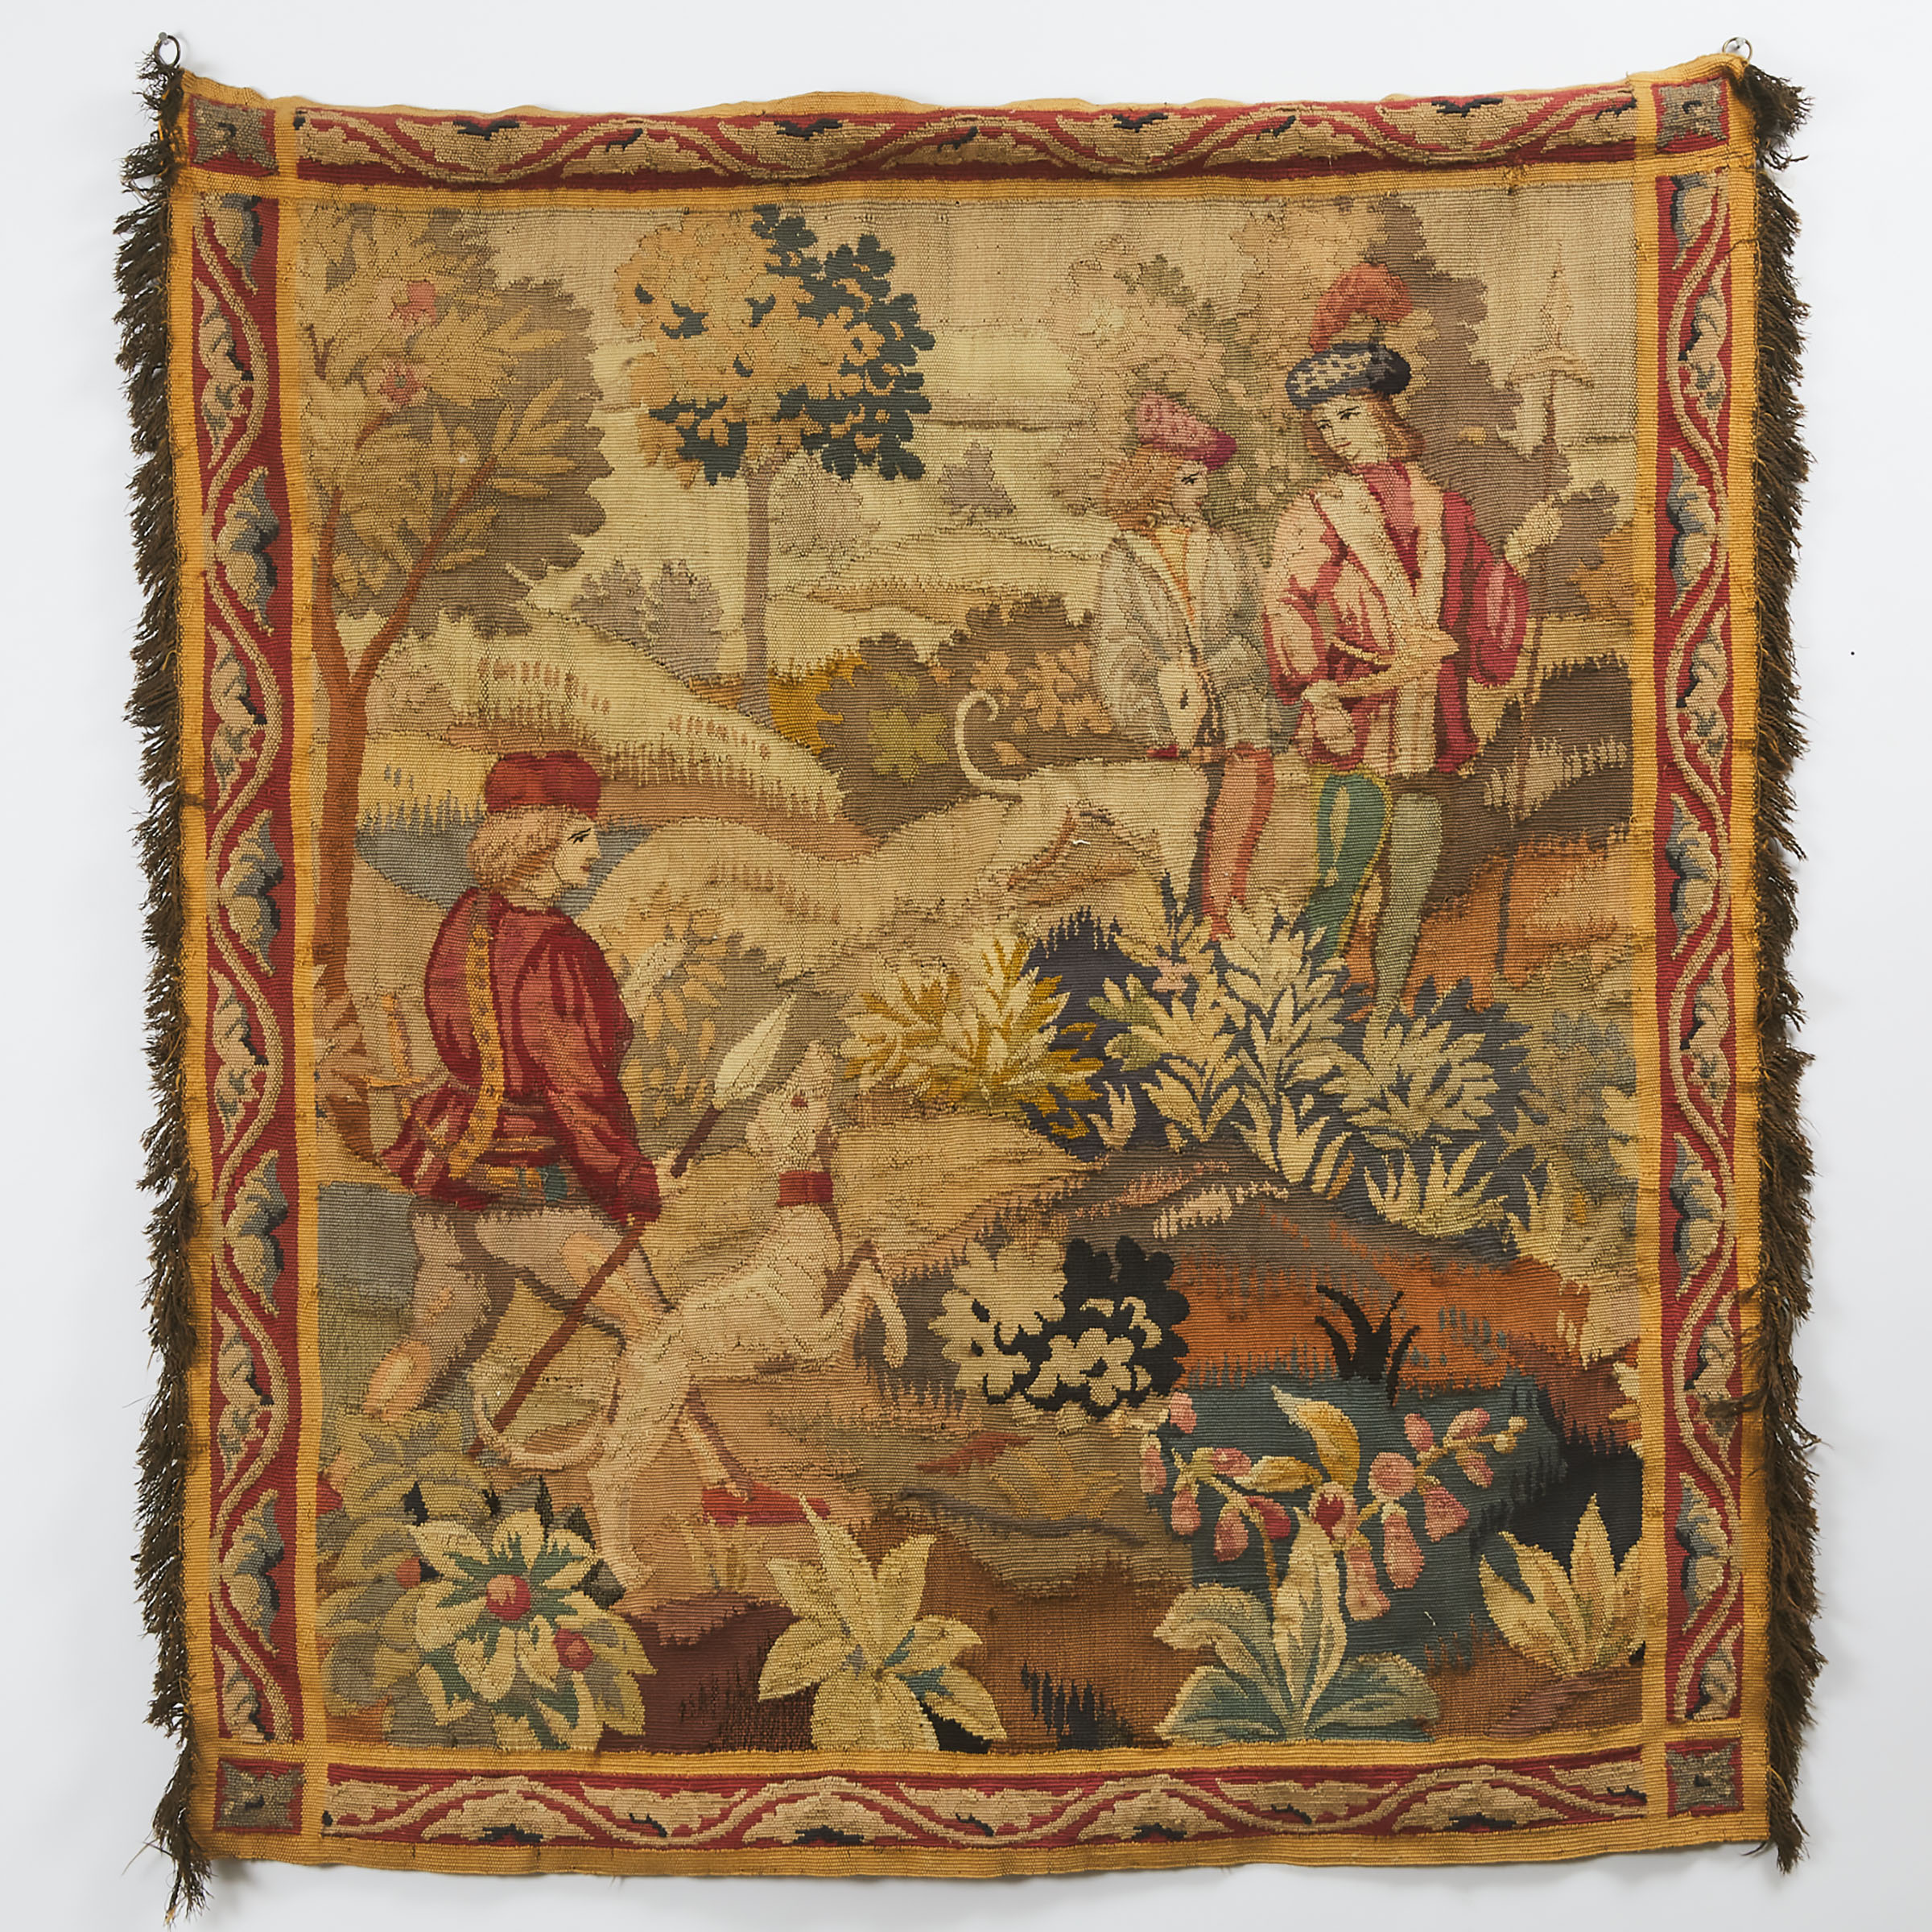 Aubusson Hunting Tapestry, 19th century